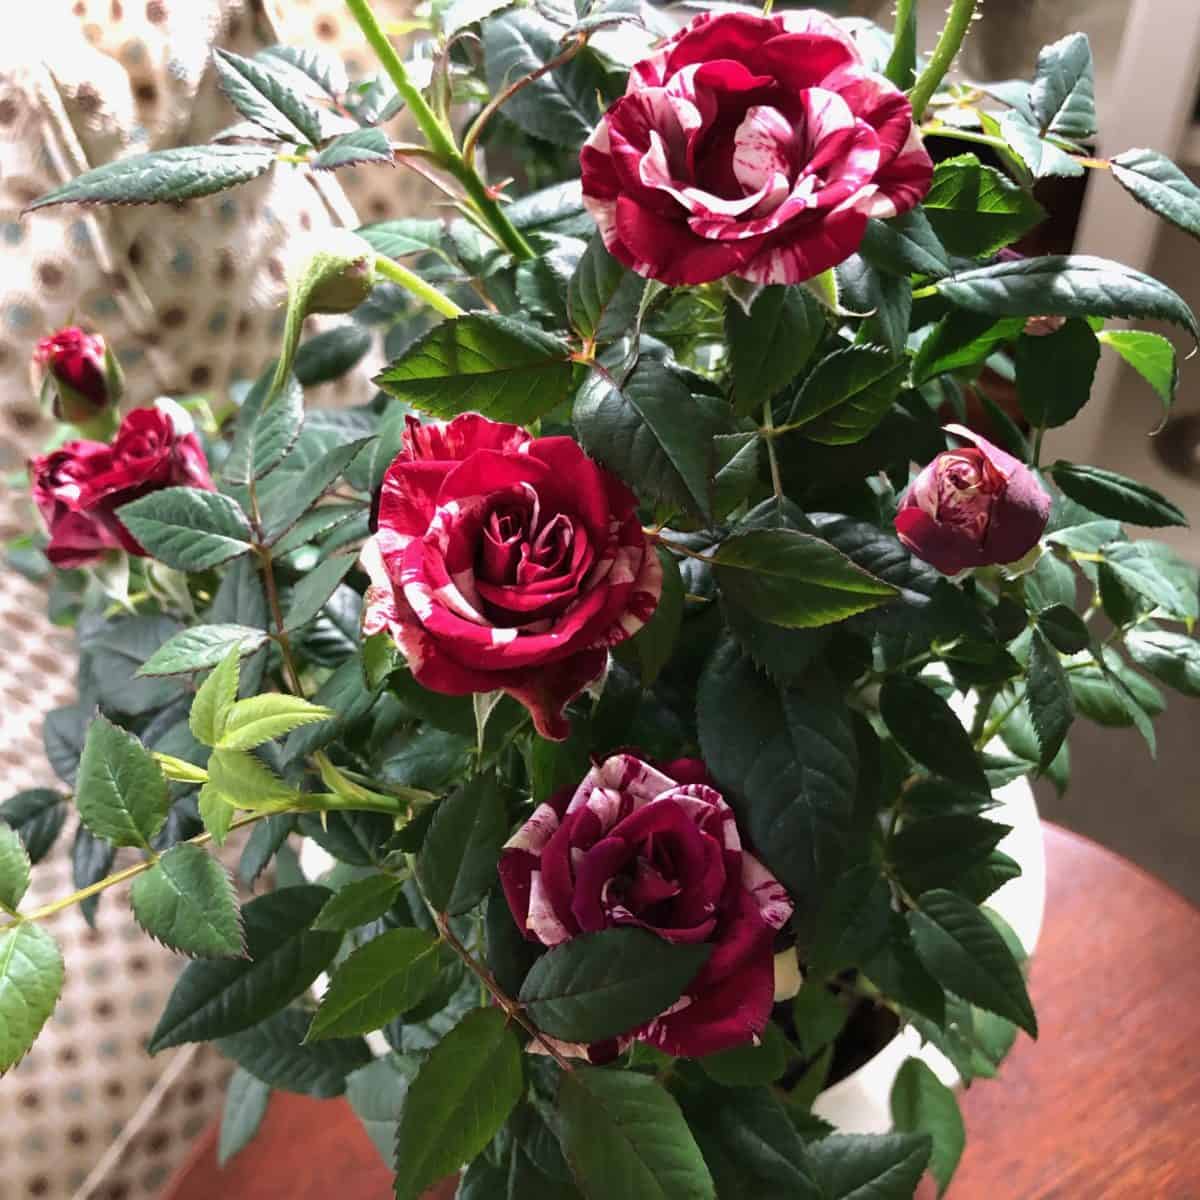 Potted minature roses